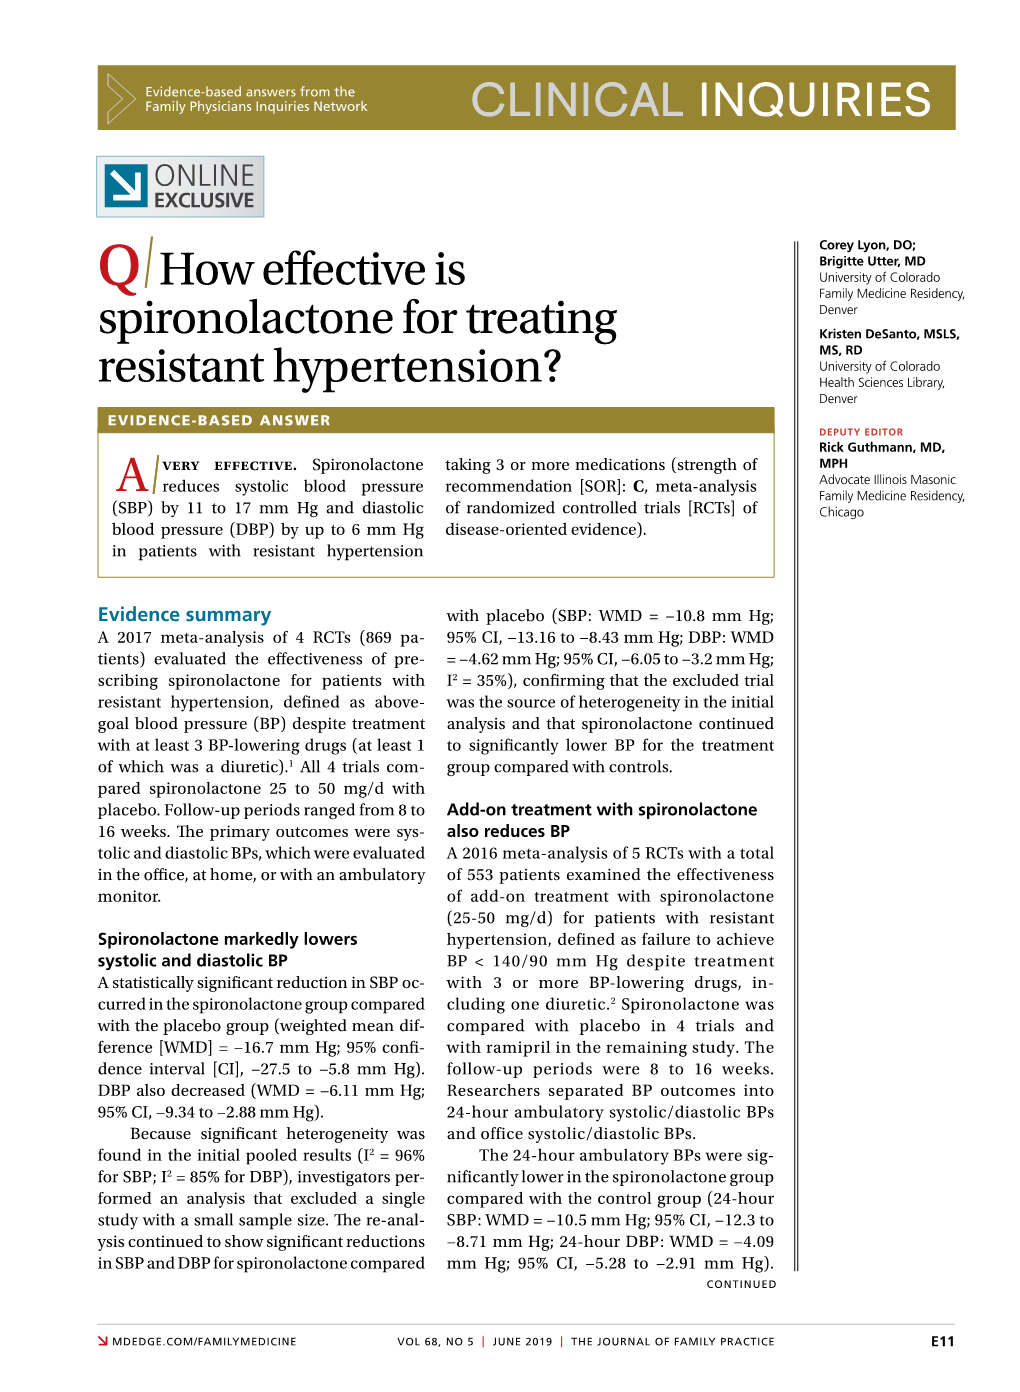 Q How Effective Is Spironolactone for Treating Resistant Hypertension?